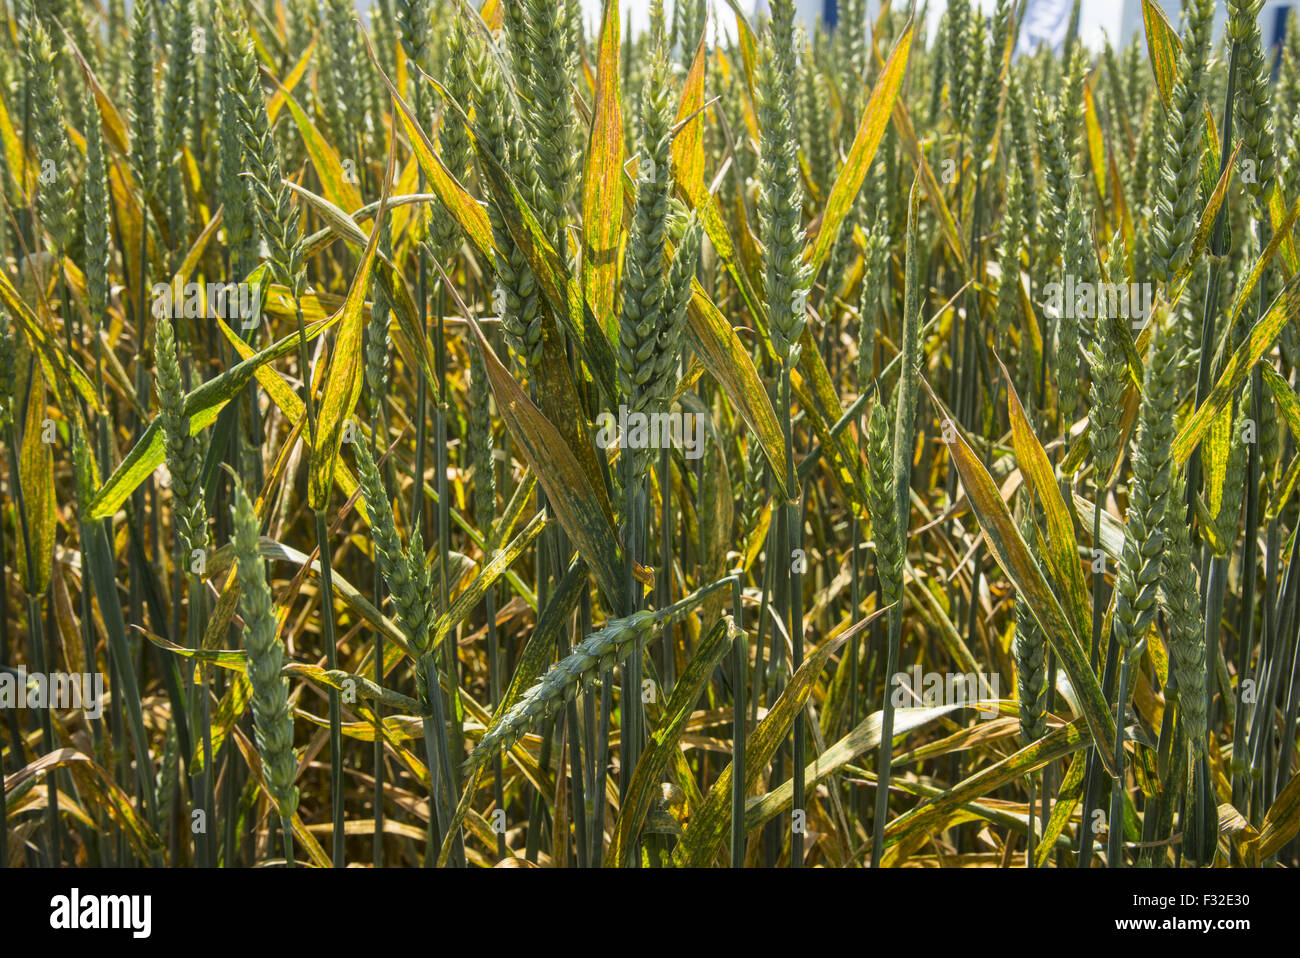 Wheat (Triticum aestivum) crop, leaves infected with Yellow Rust (Puccinia striiformis) fungal disease, Lincolnshire, England, June Stock Photo